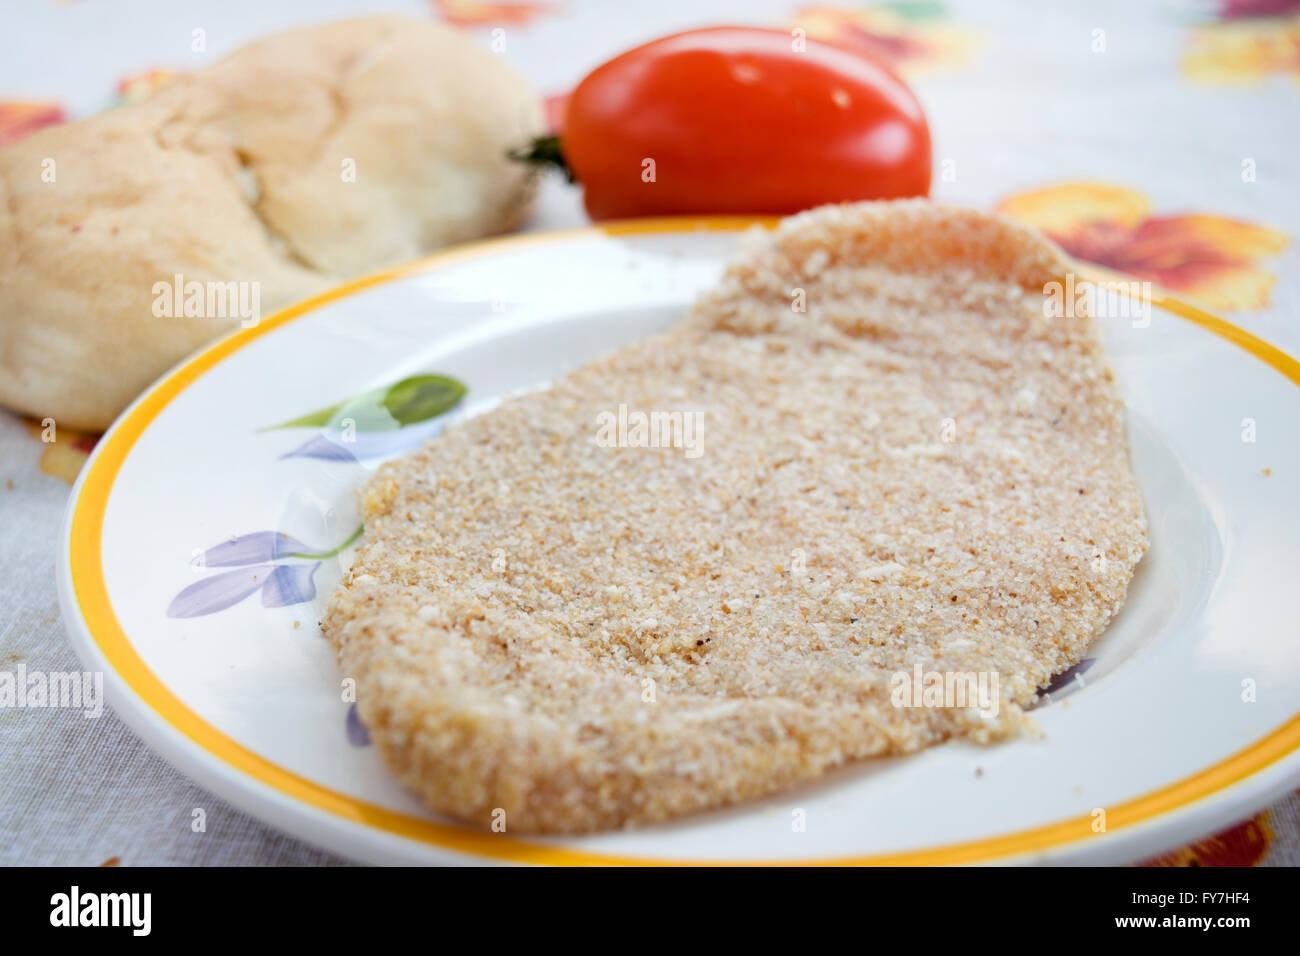 uncooked veal cutlet with a bread roll and fresh tomatoes Stock Photo